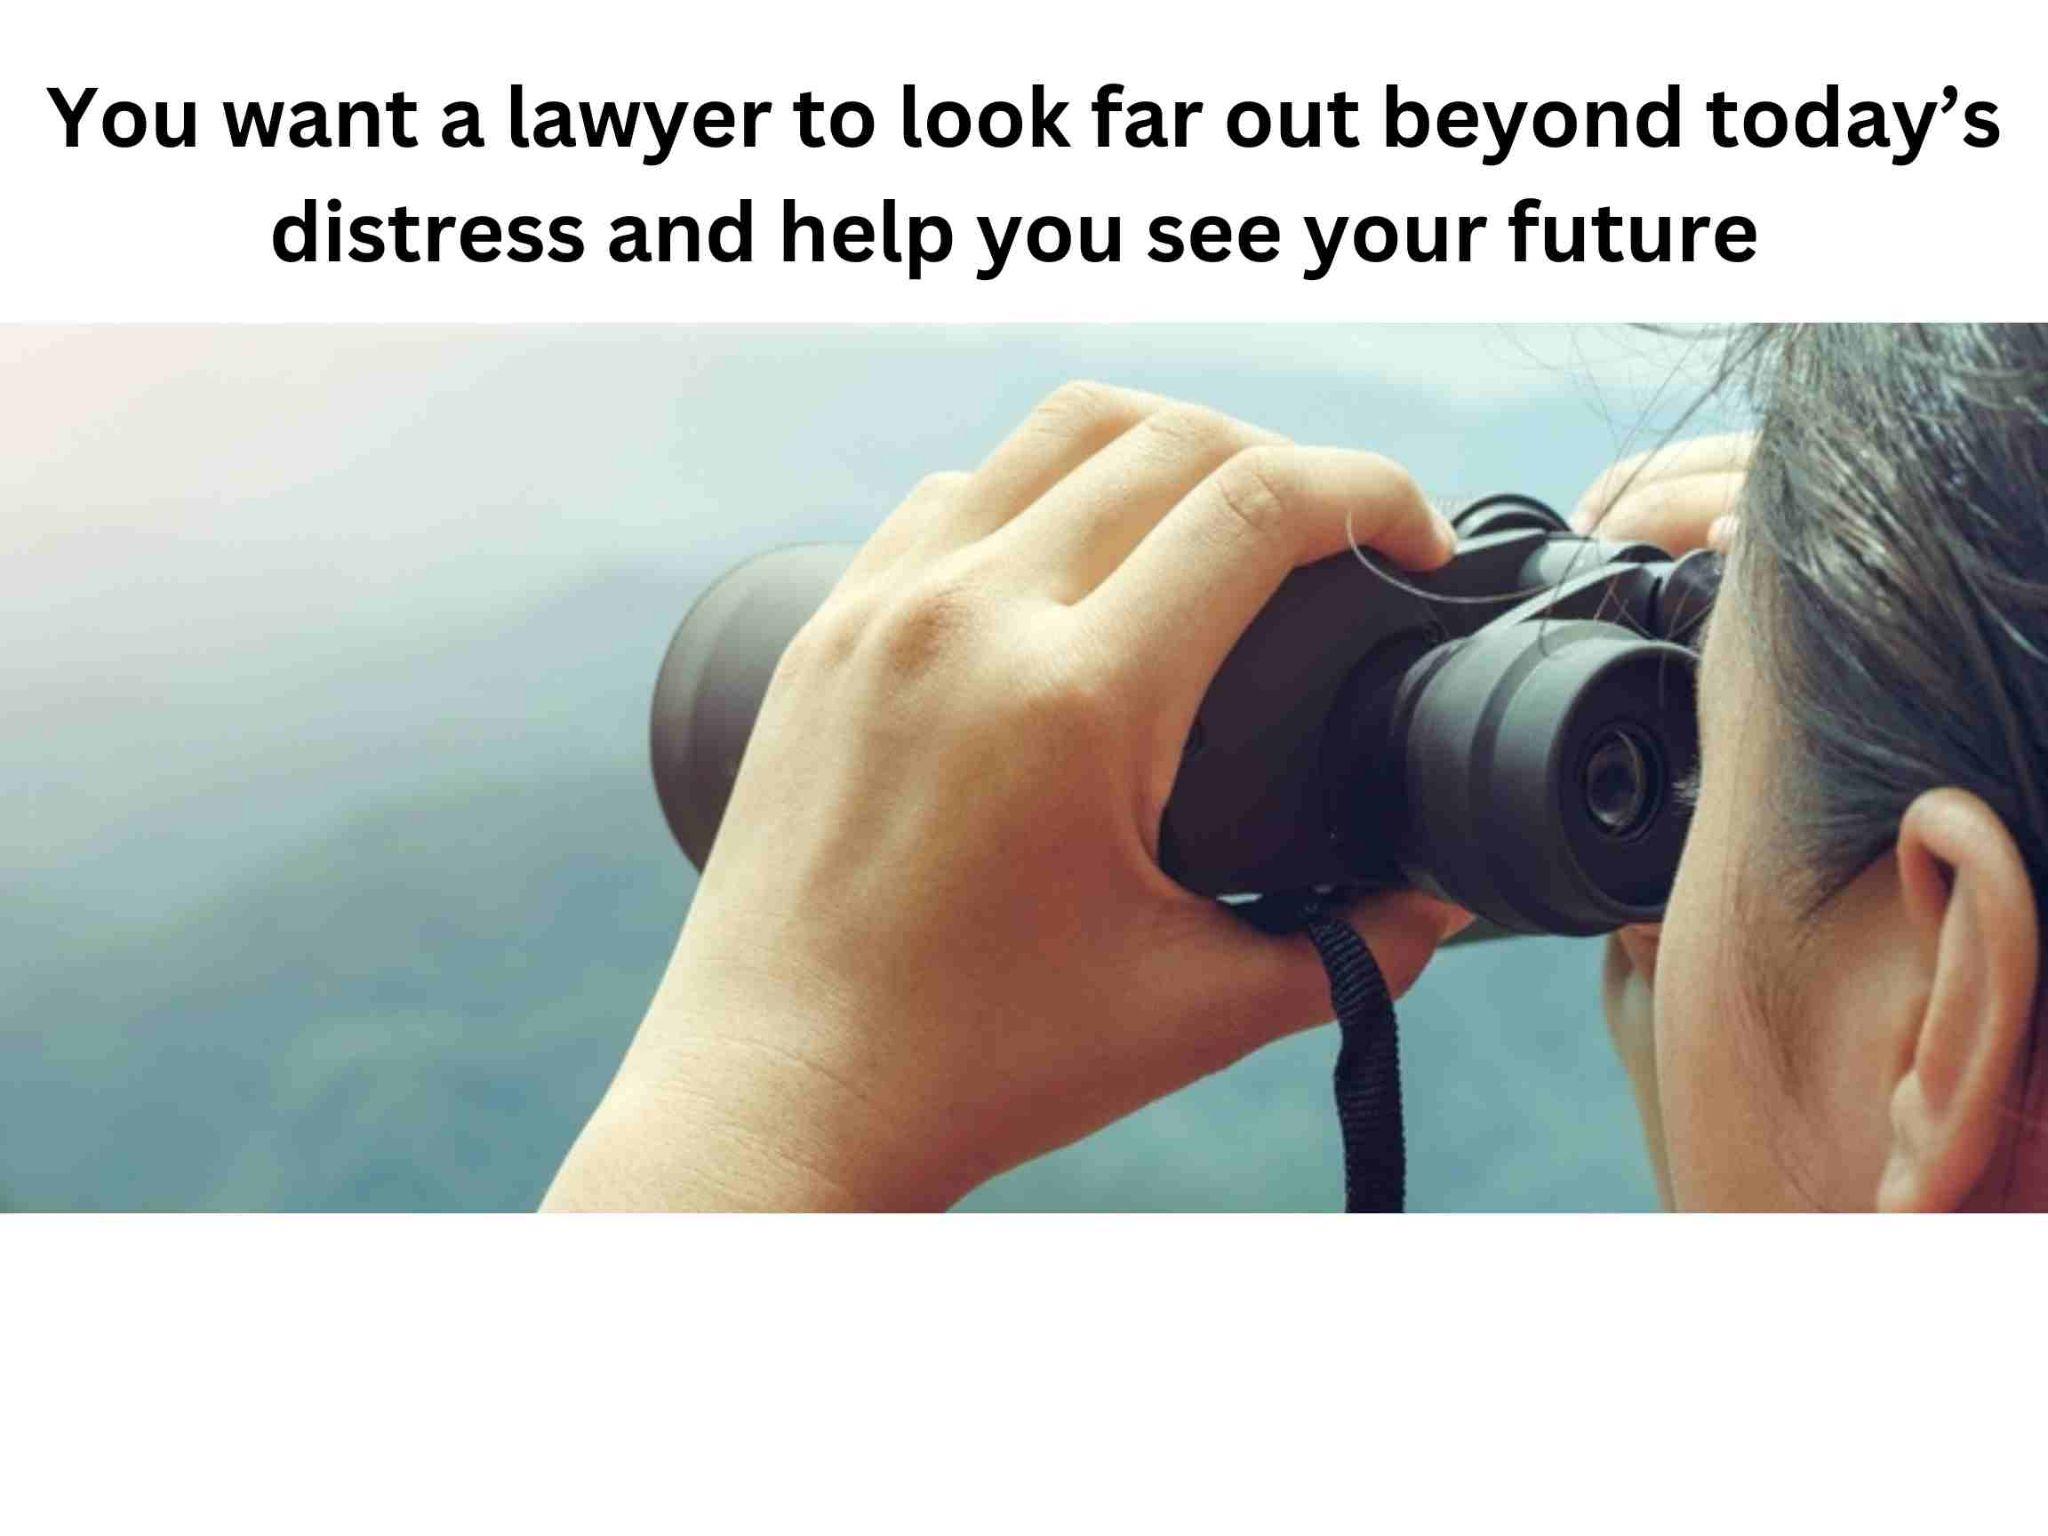 Person using binoculars to observe something in the distance, with a caption suggesting seeking a lawyer who provides far-sighted assistance.